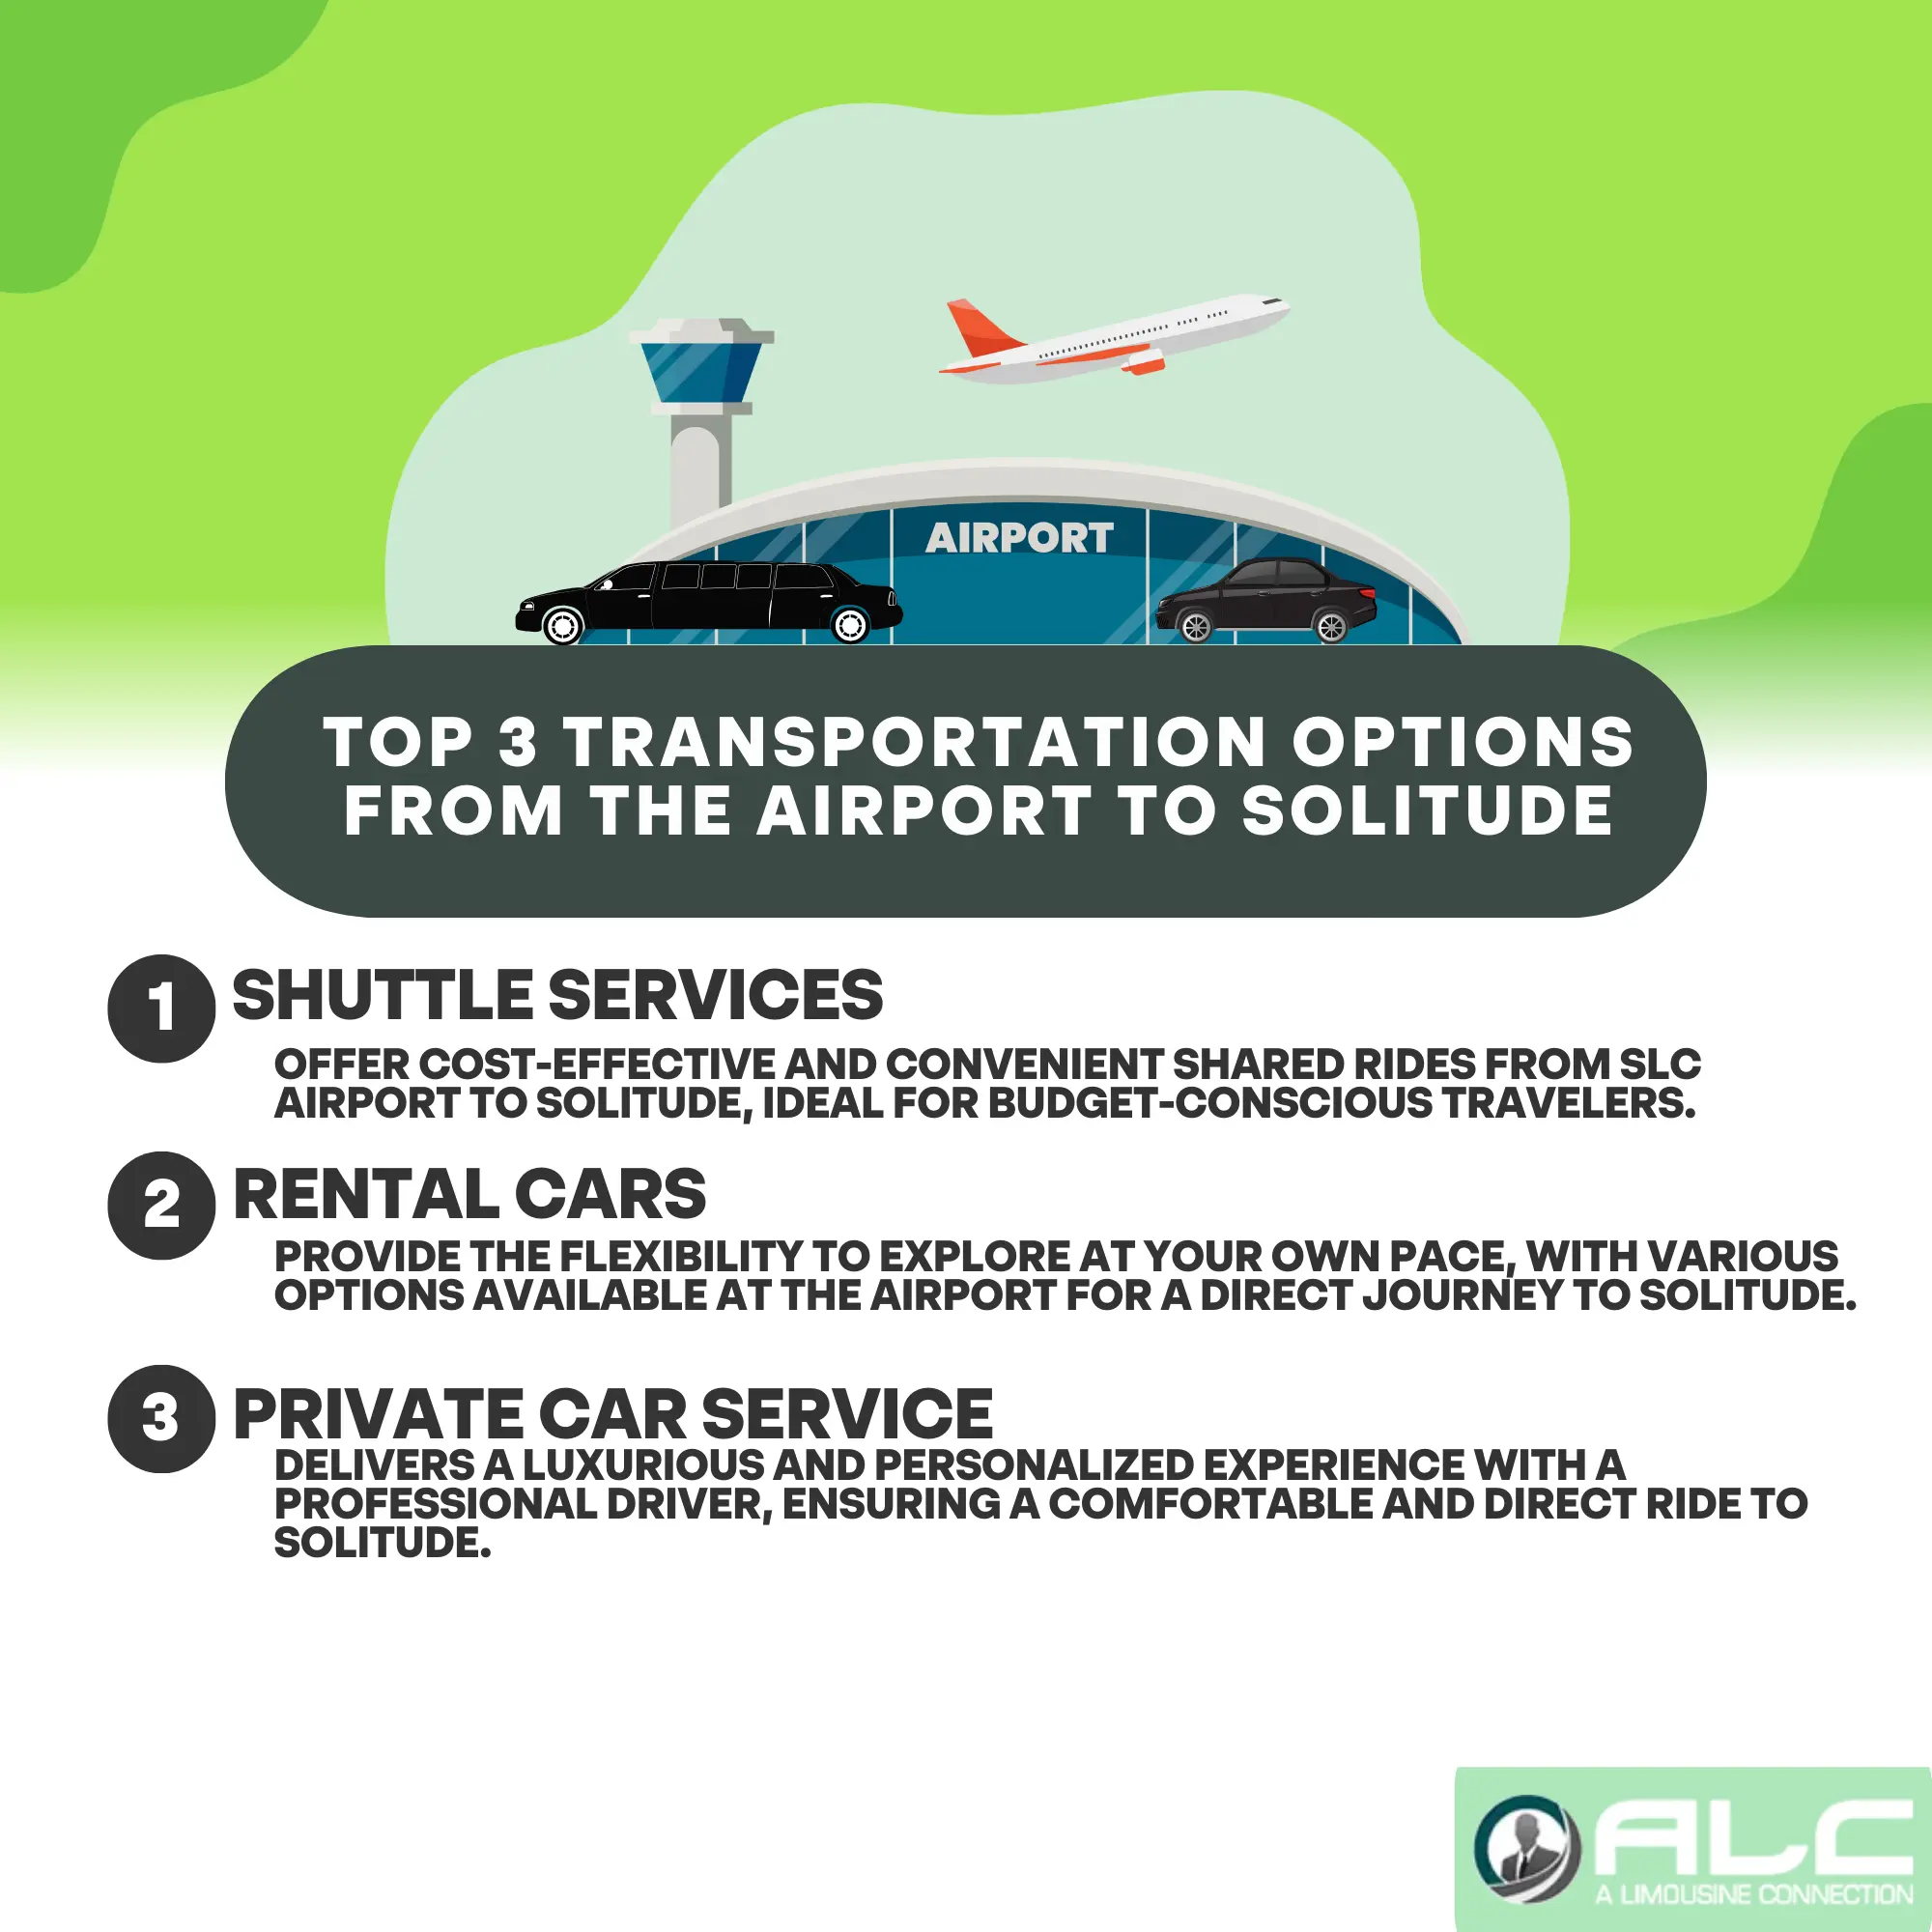 Top 3 Transportation Options from the Airport to Solitude